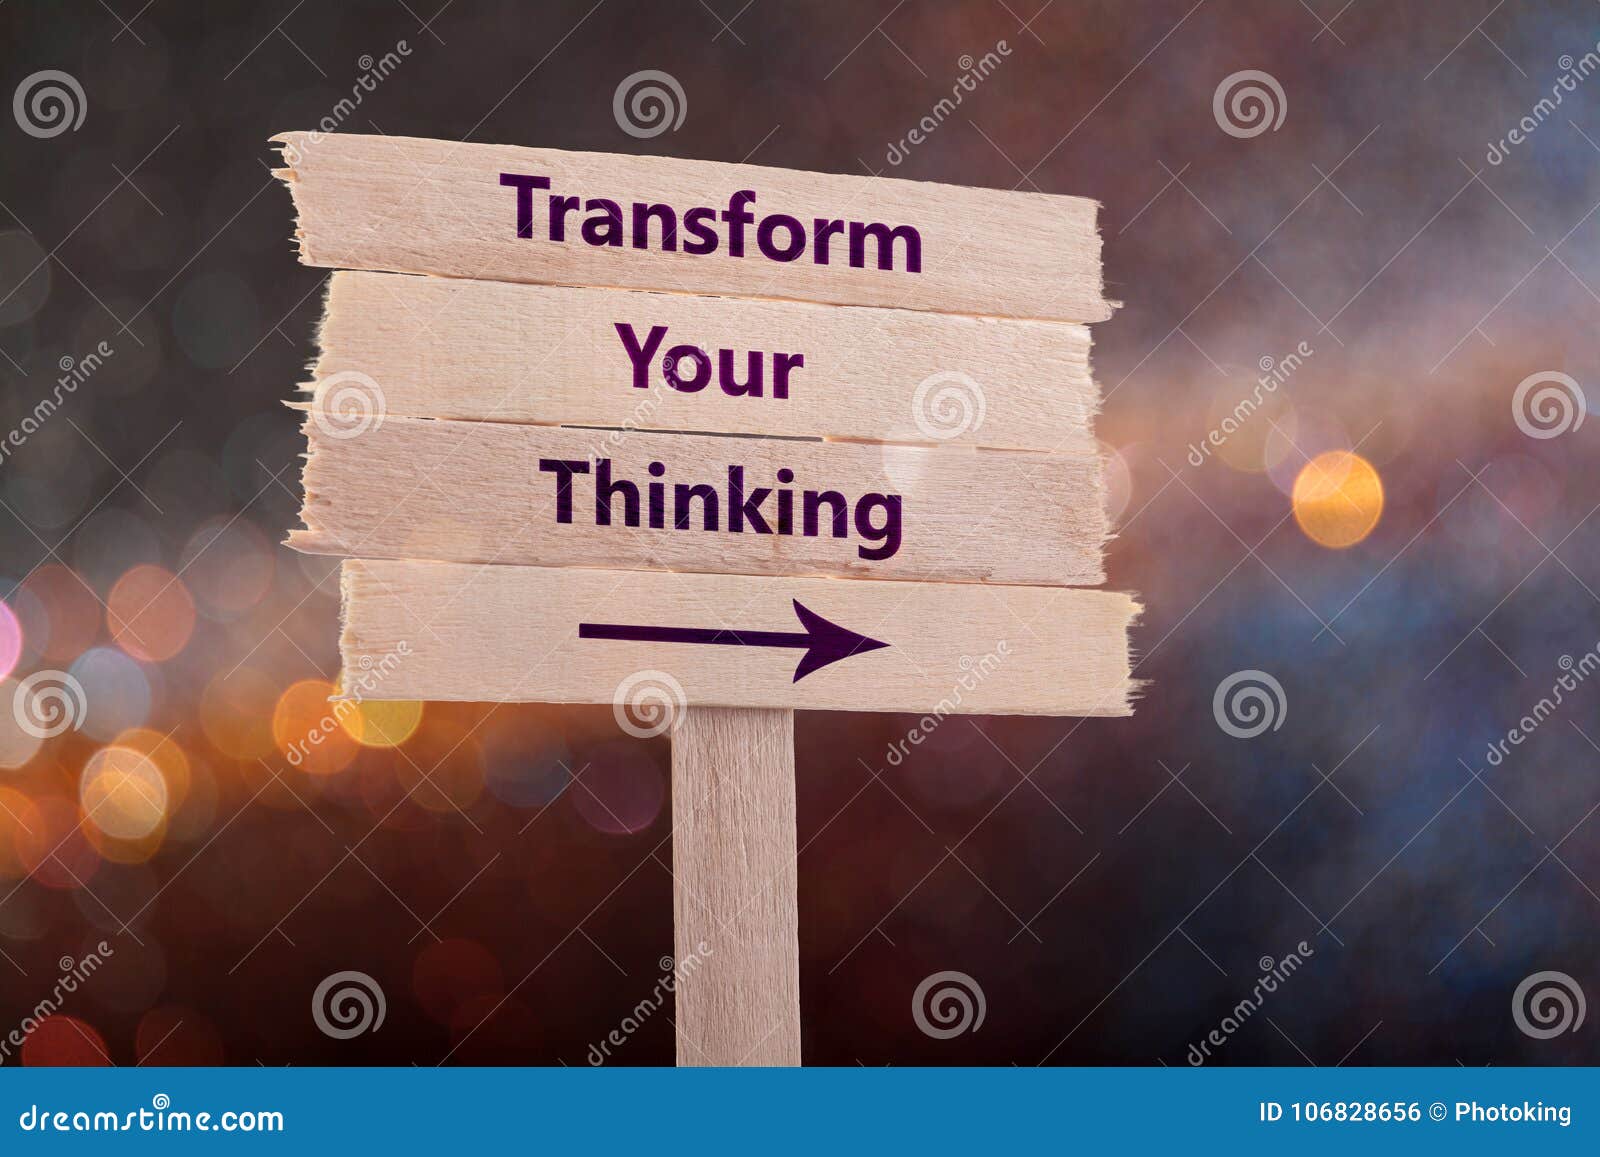 transform your thinking